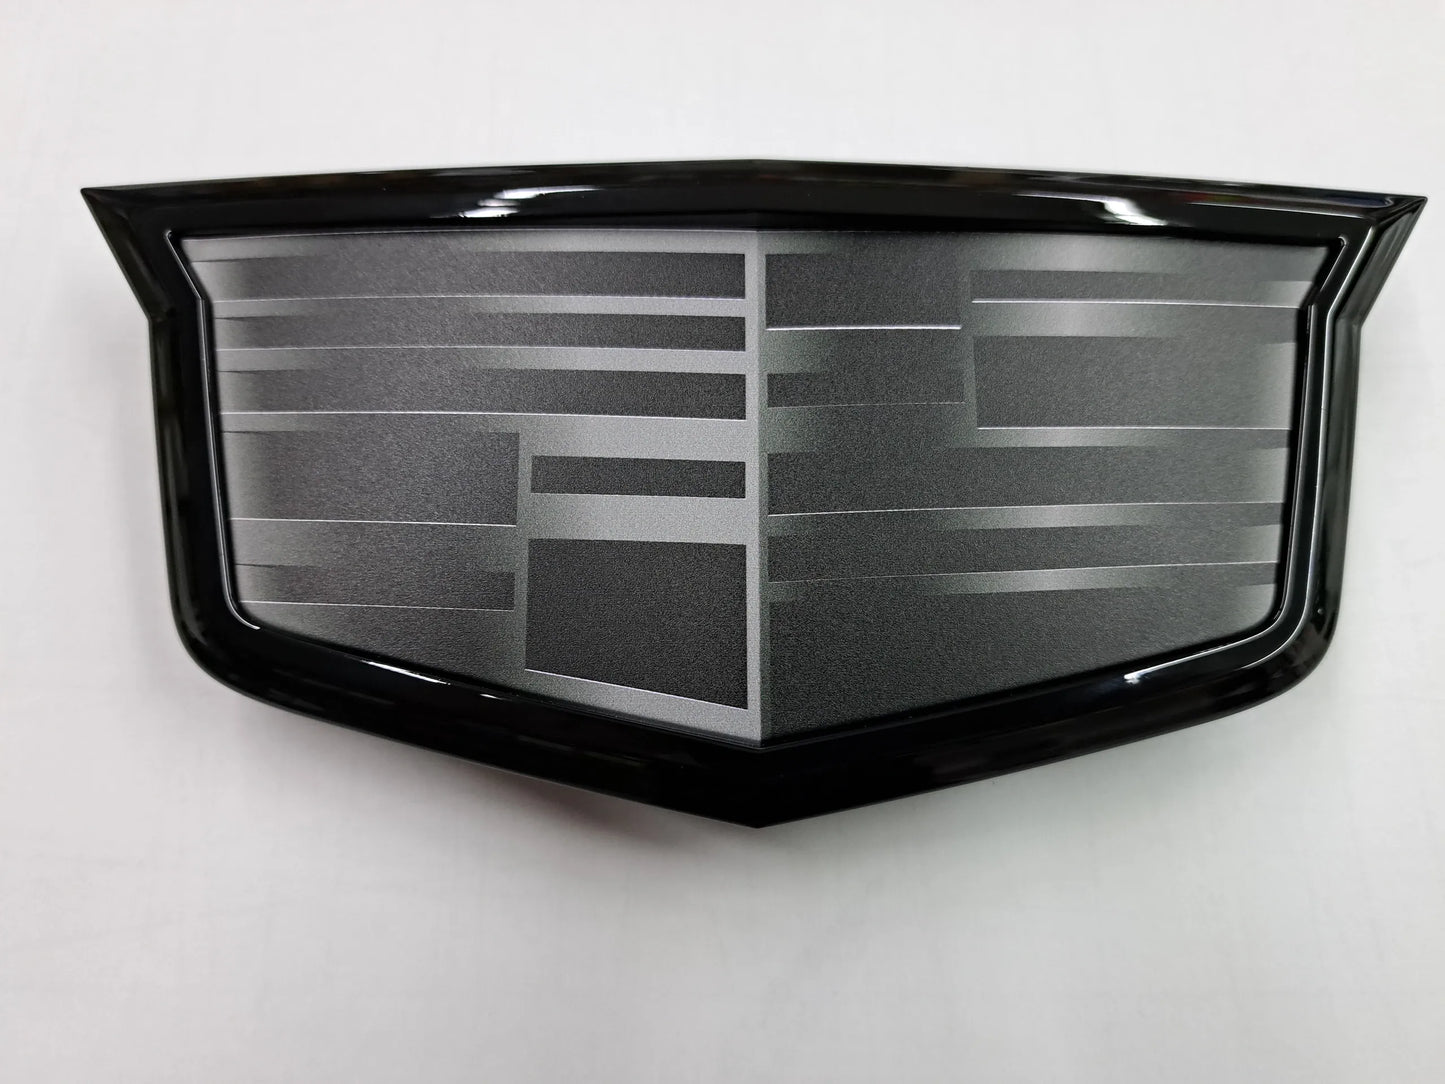 CT5-V Blackwing Front Adaptive Cruise Cadillac Shield Emblem (Multiple Color Choices)